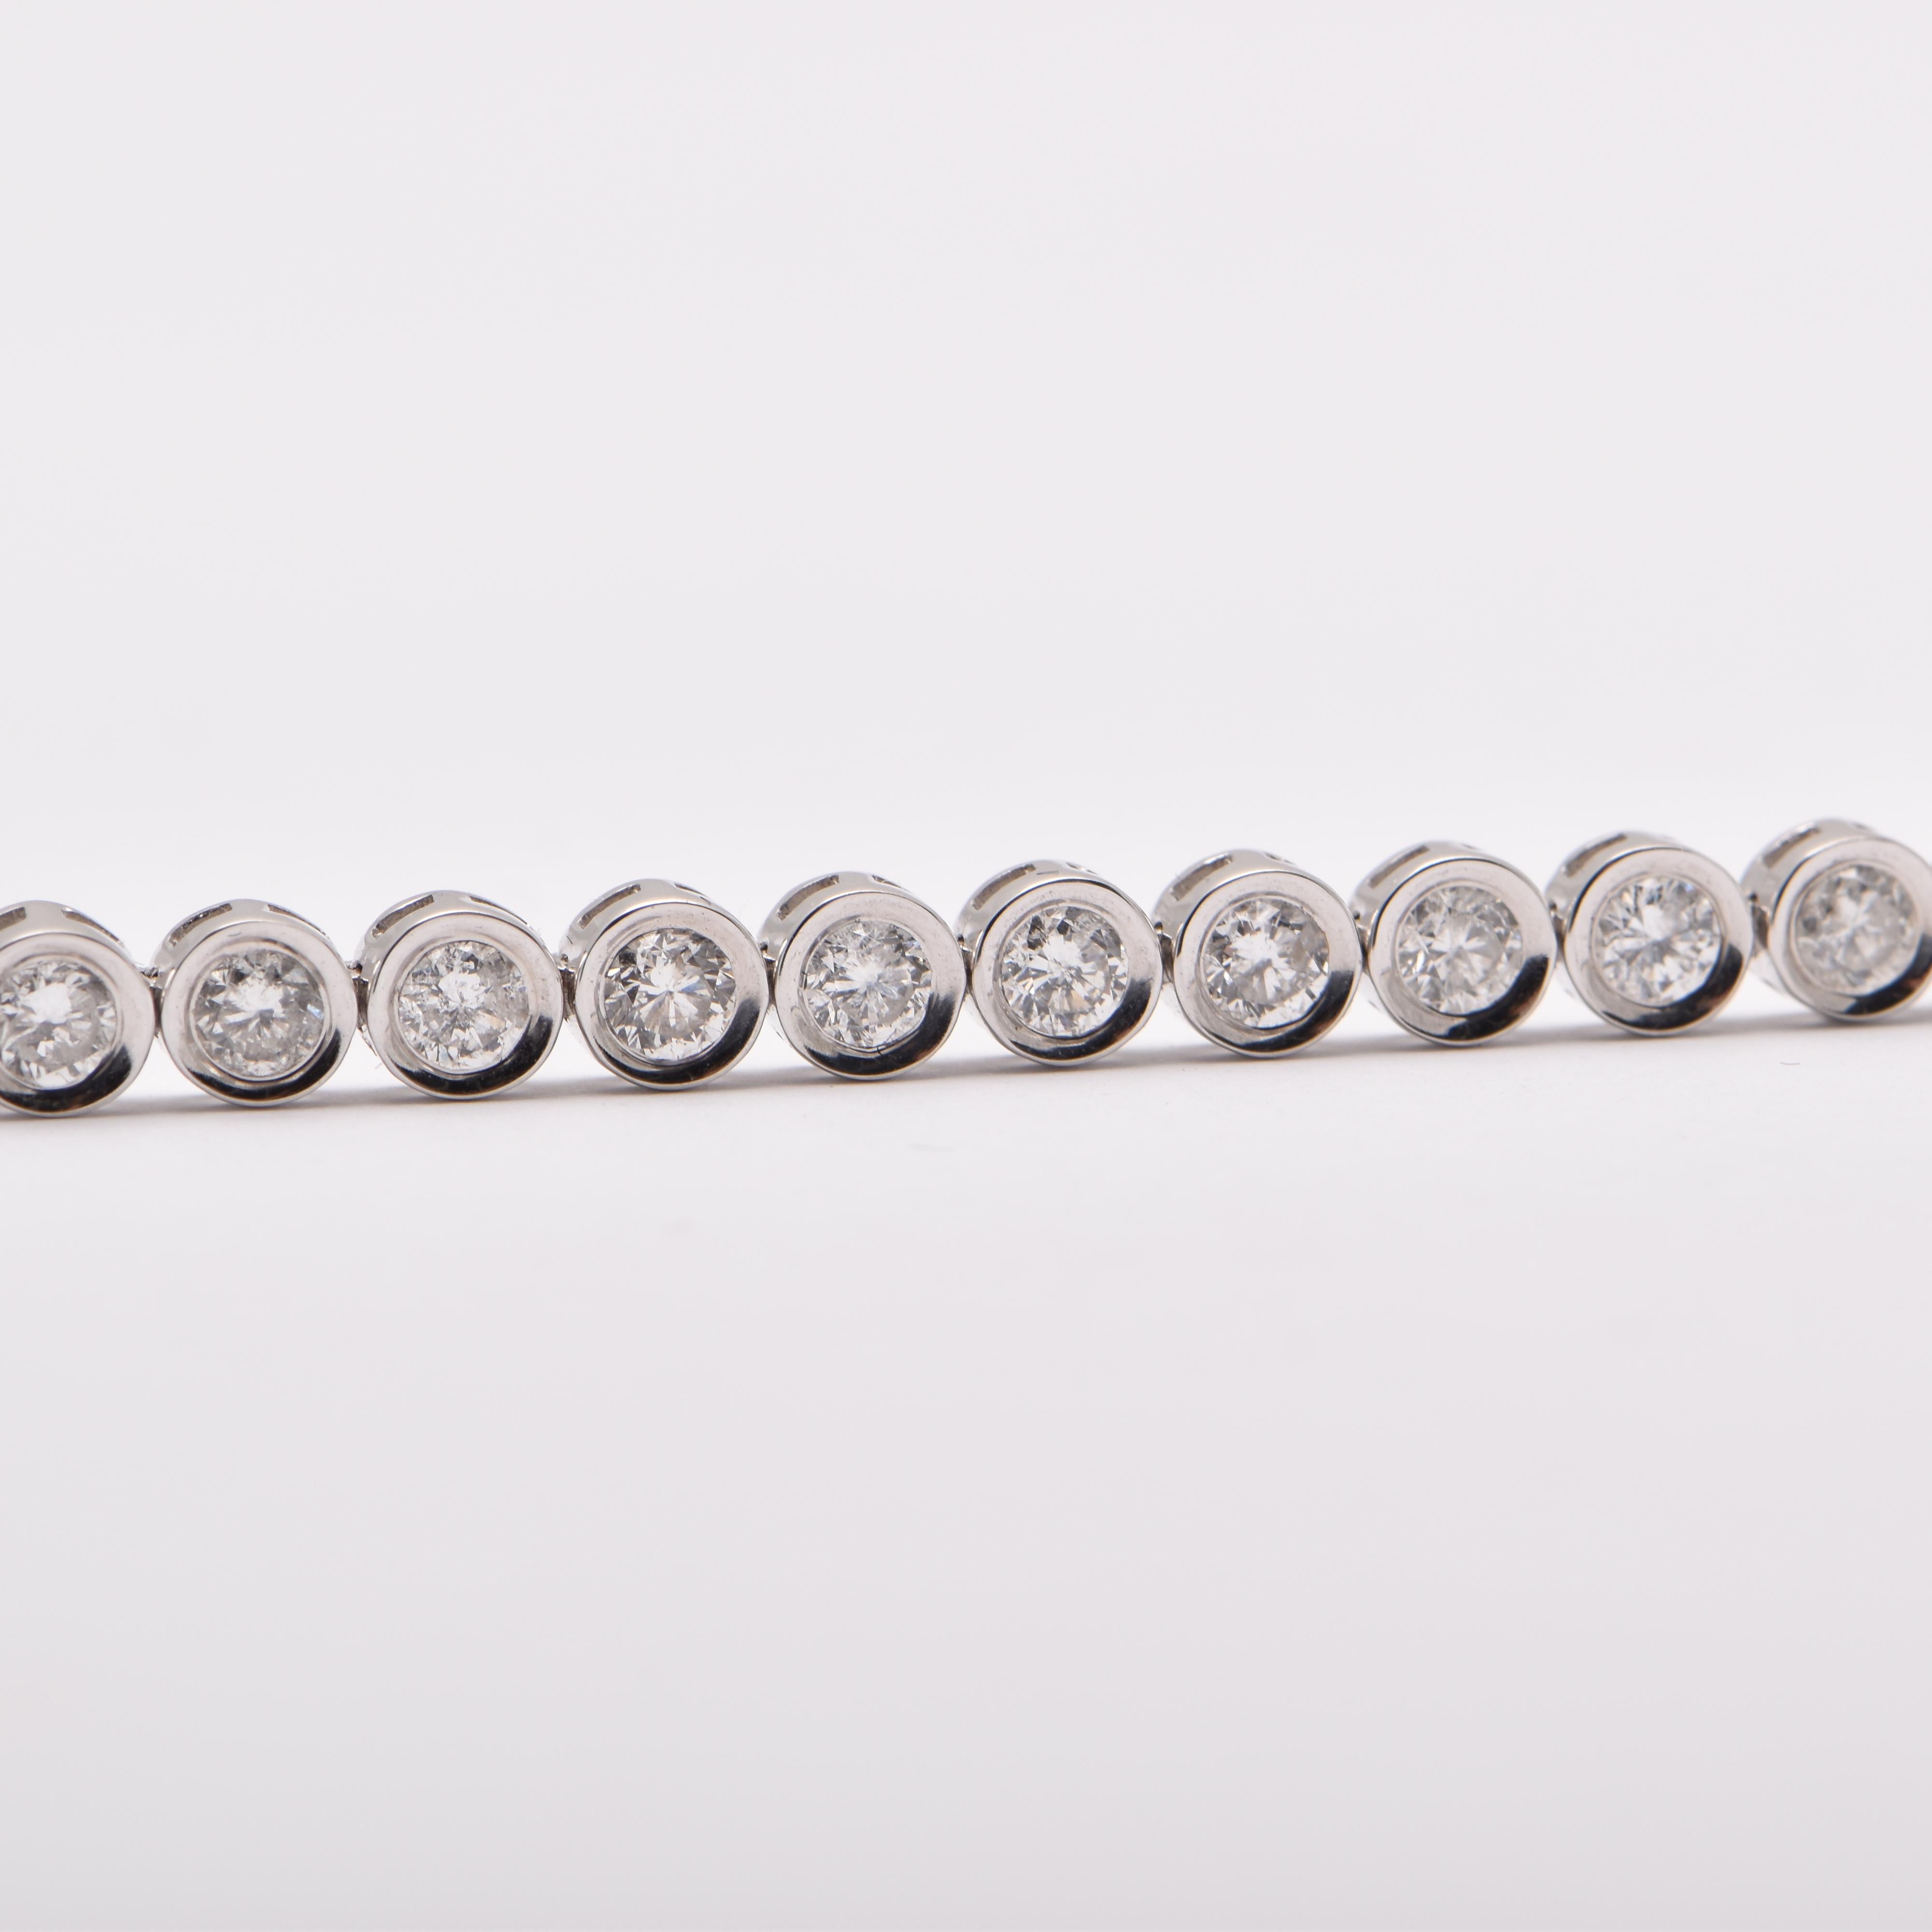 Diamond tennis bracelet; featuring 39 round brilliant cut diamonds totalling 4.23 Carats, set in 18ct white gold (total 12.77 grams)   

FREE express postage usually 3-4 days Sydney to New York  
FREE international insurance 
by Cartmer Jewellery,